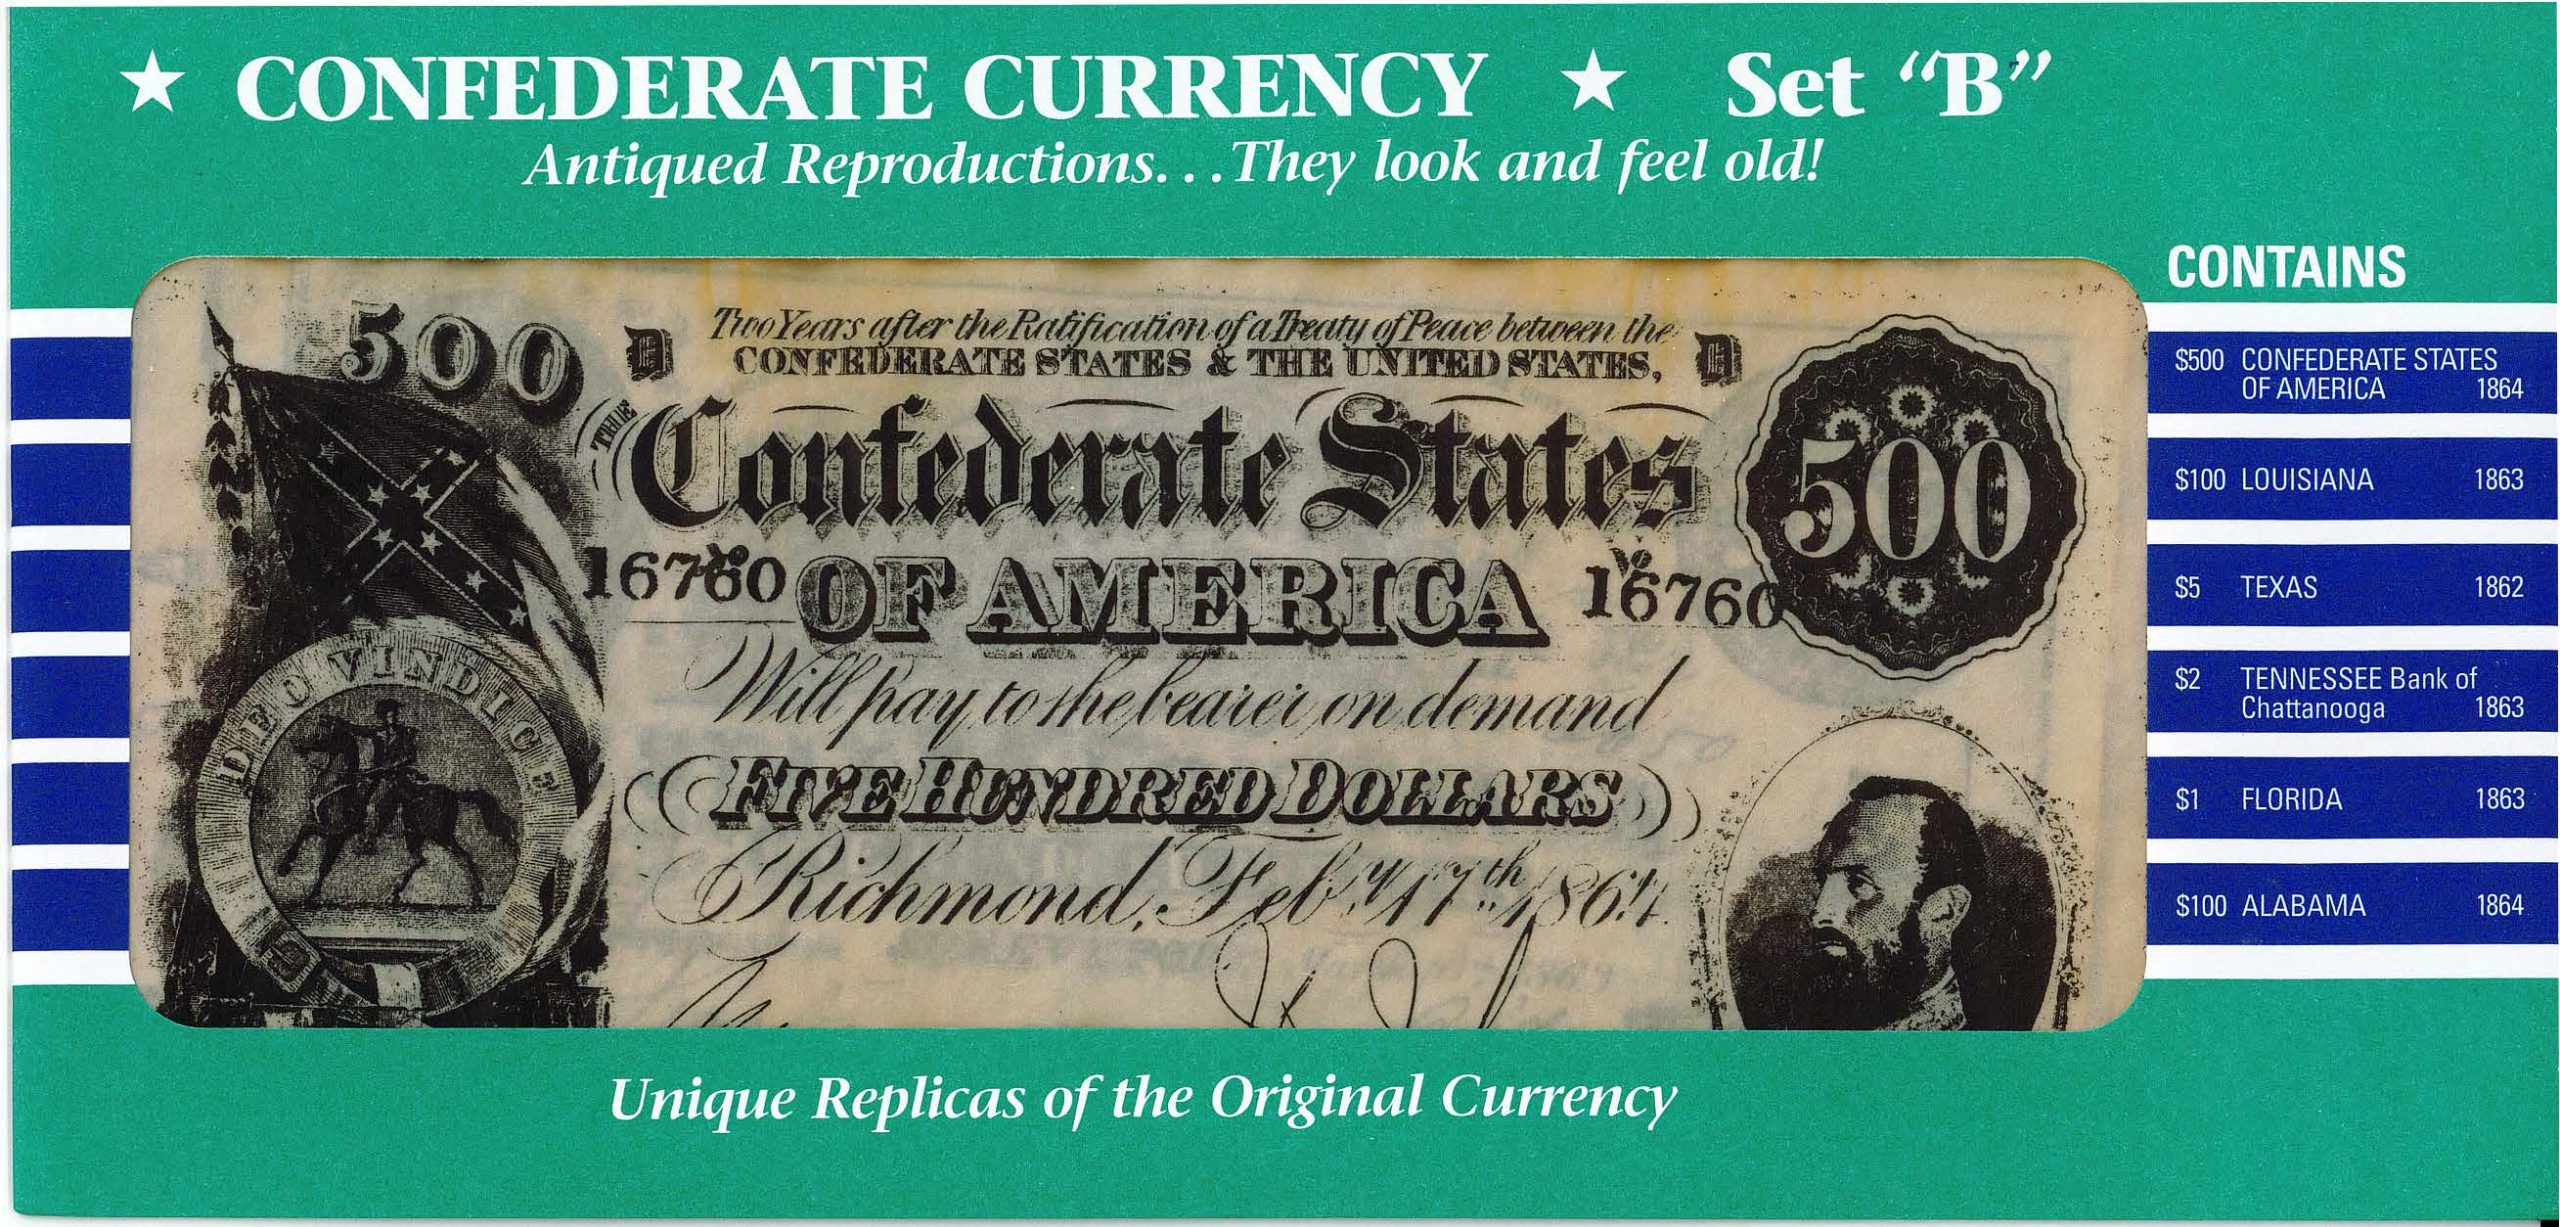 Documents- Confederate Currency “B”